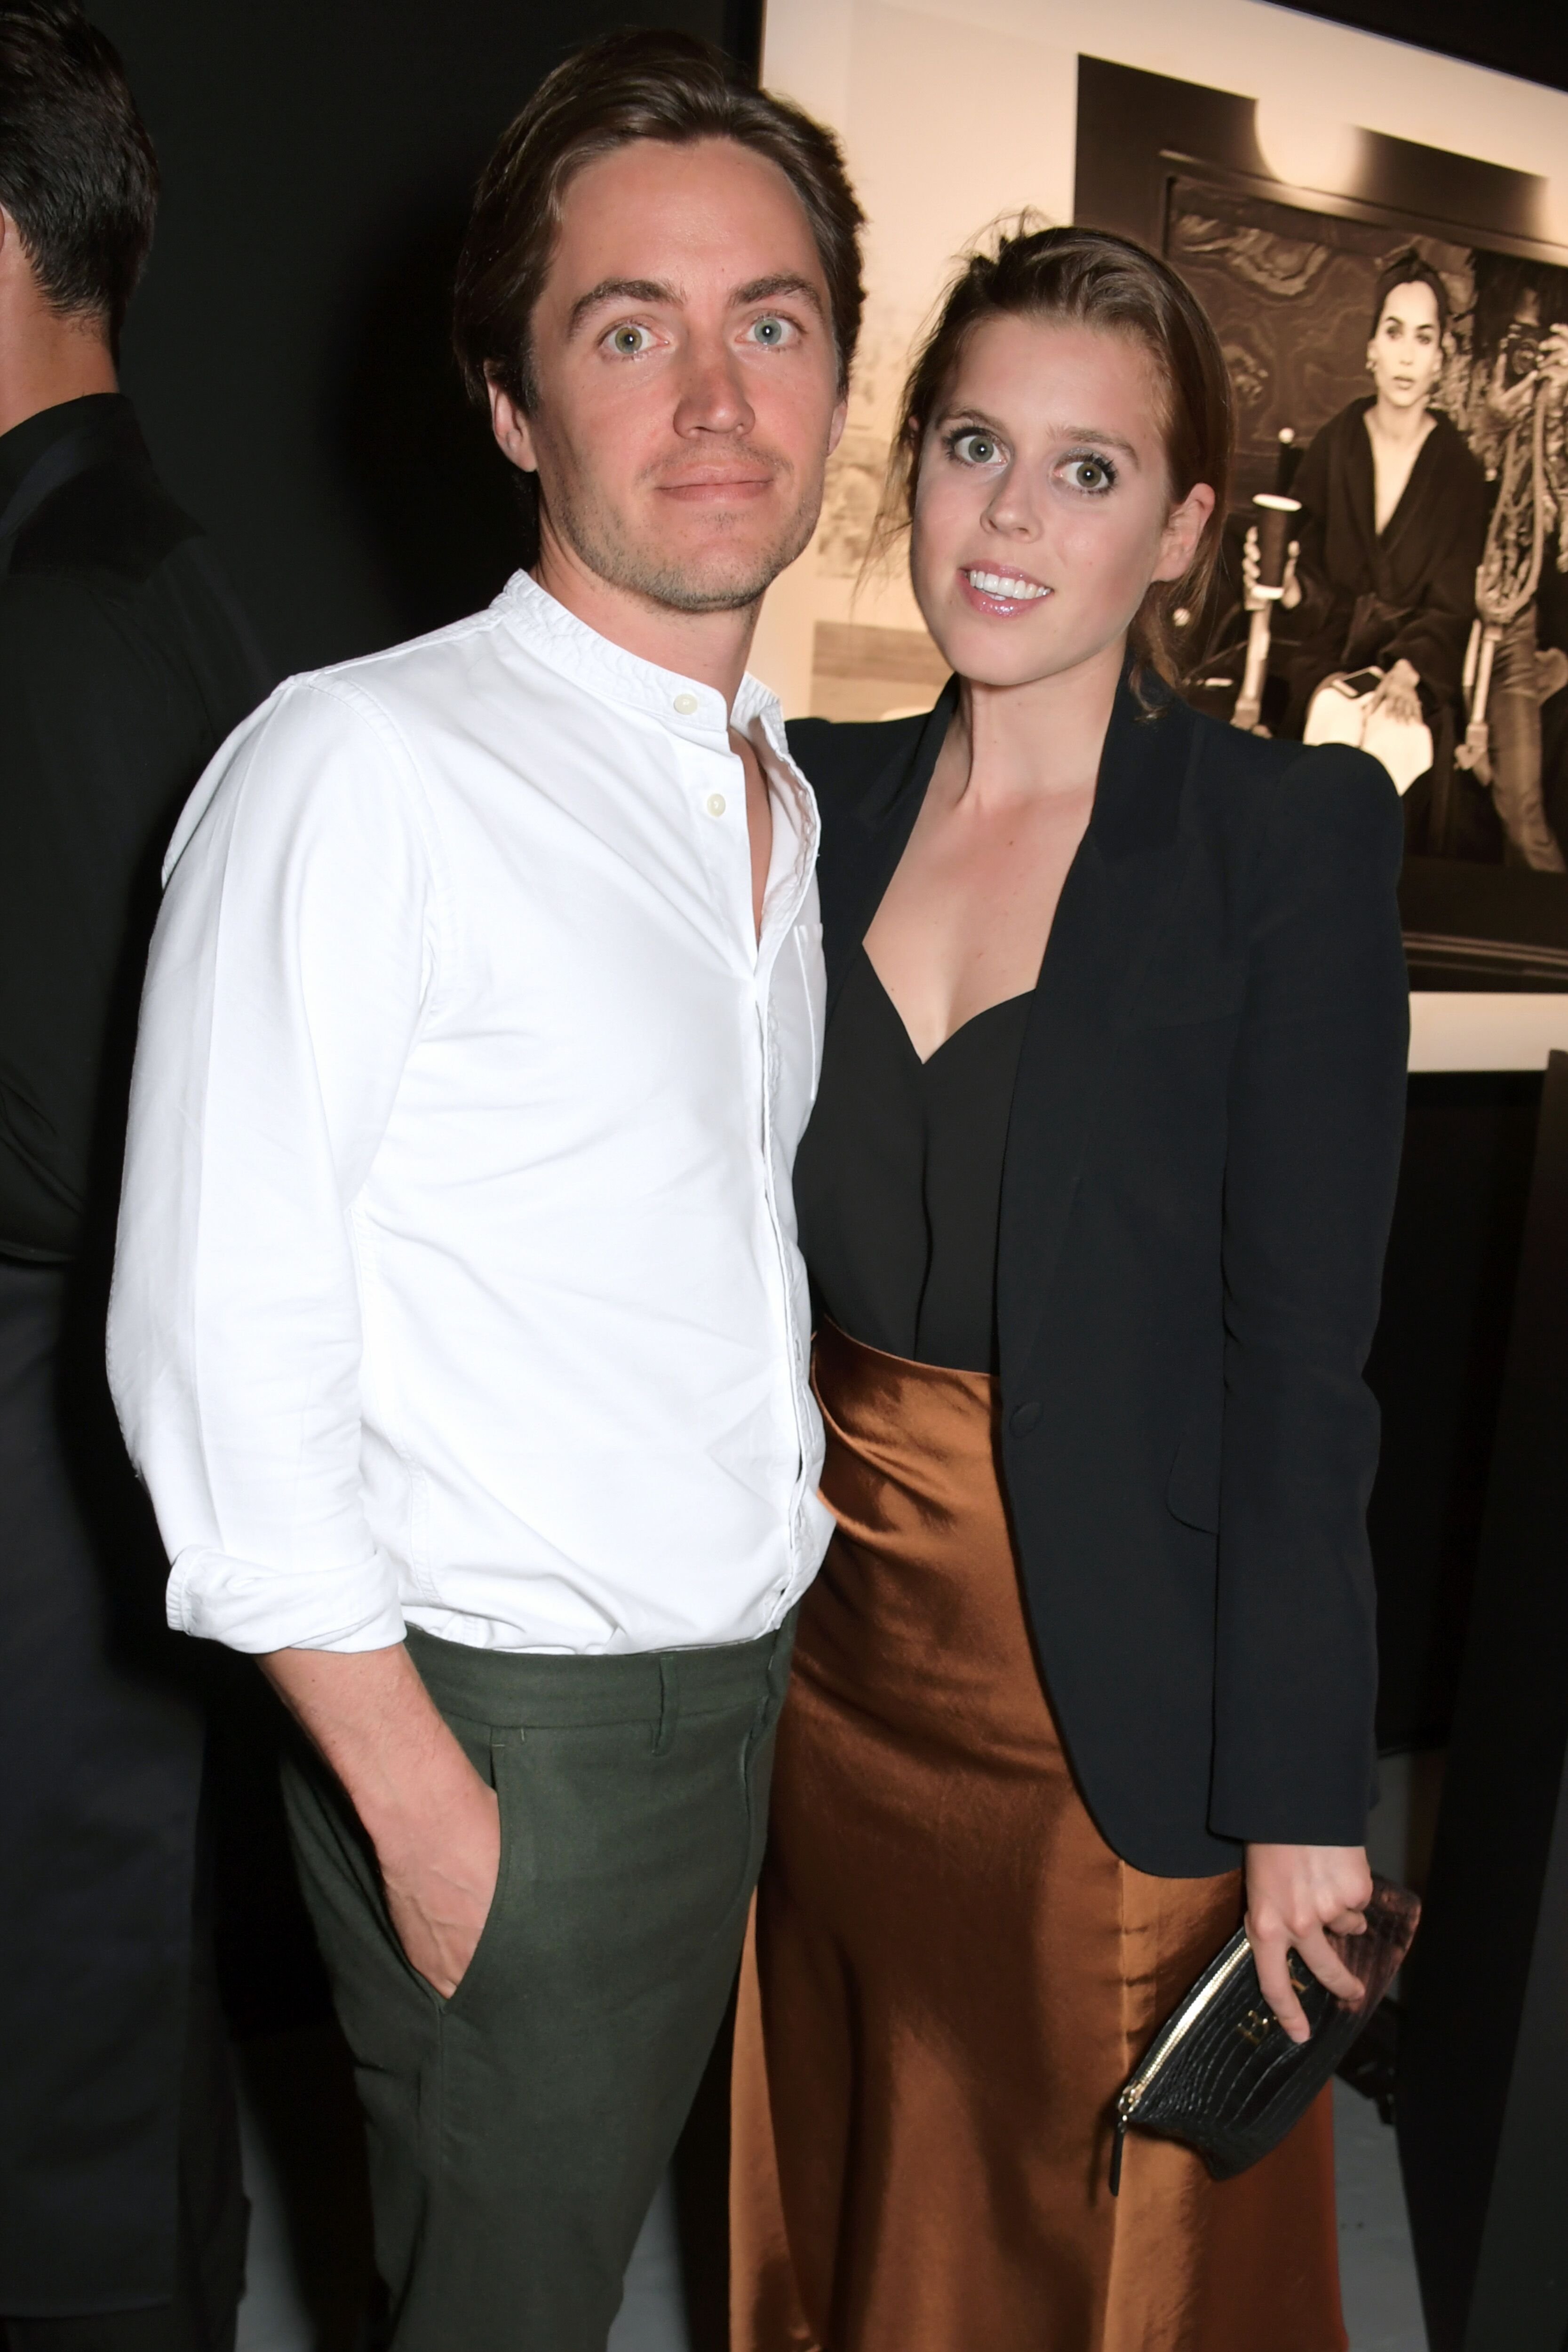 Edoardo Mapelli Mozzi and Princess Beatrice of York attend the Lenny Kravitz & Dom Perignon 'Assemblage' exhibition, the launch Of Lenny Kravitz' UK Photography Exhibition, on July 10, 2019 in London, England. | Photo: Getty Images